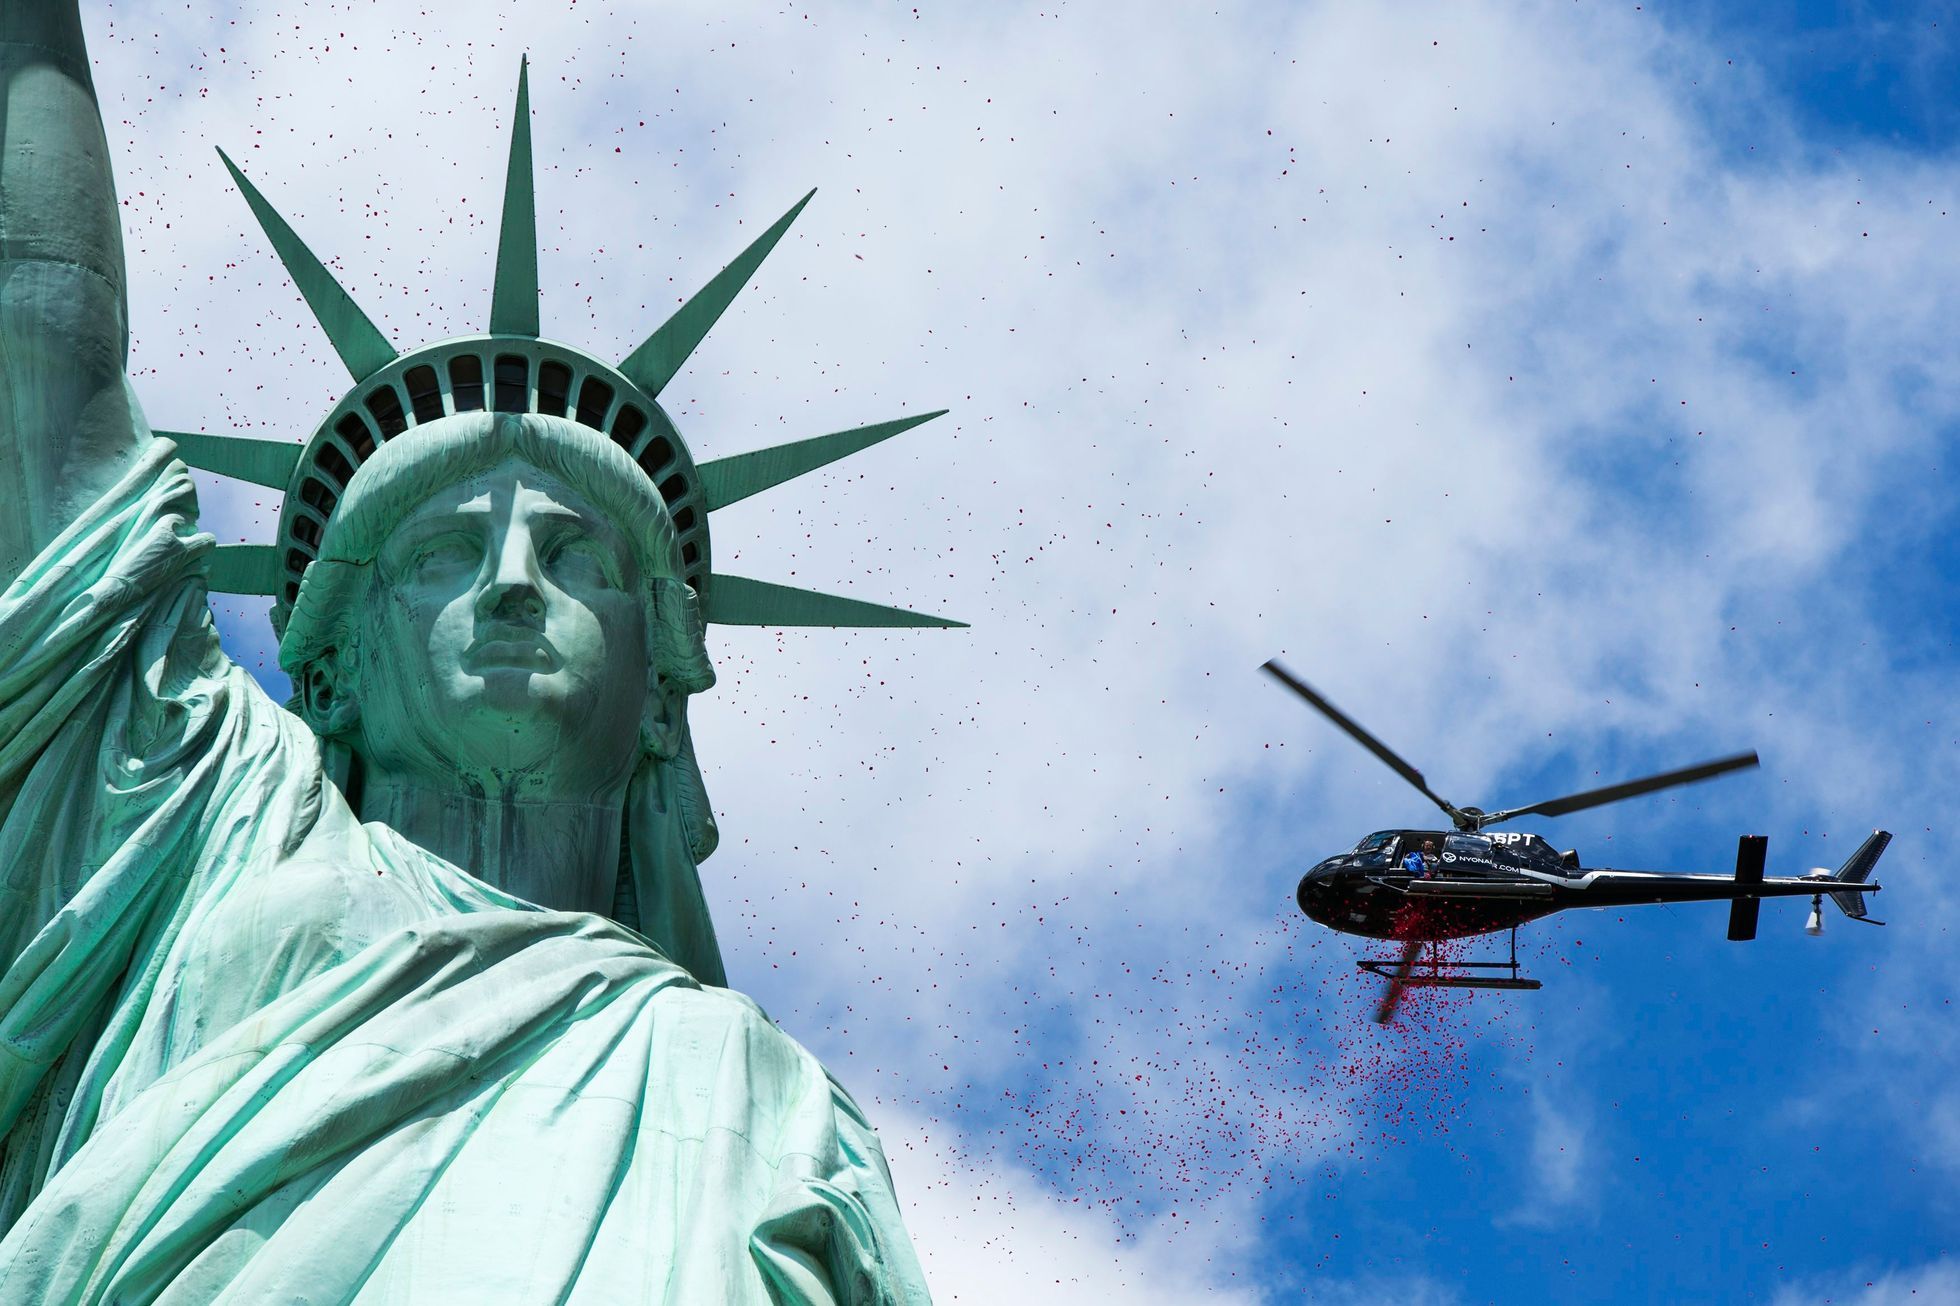 Rose petals dropped by helicopters fall around the Statue of Liberty in New York